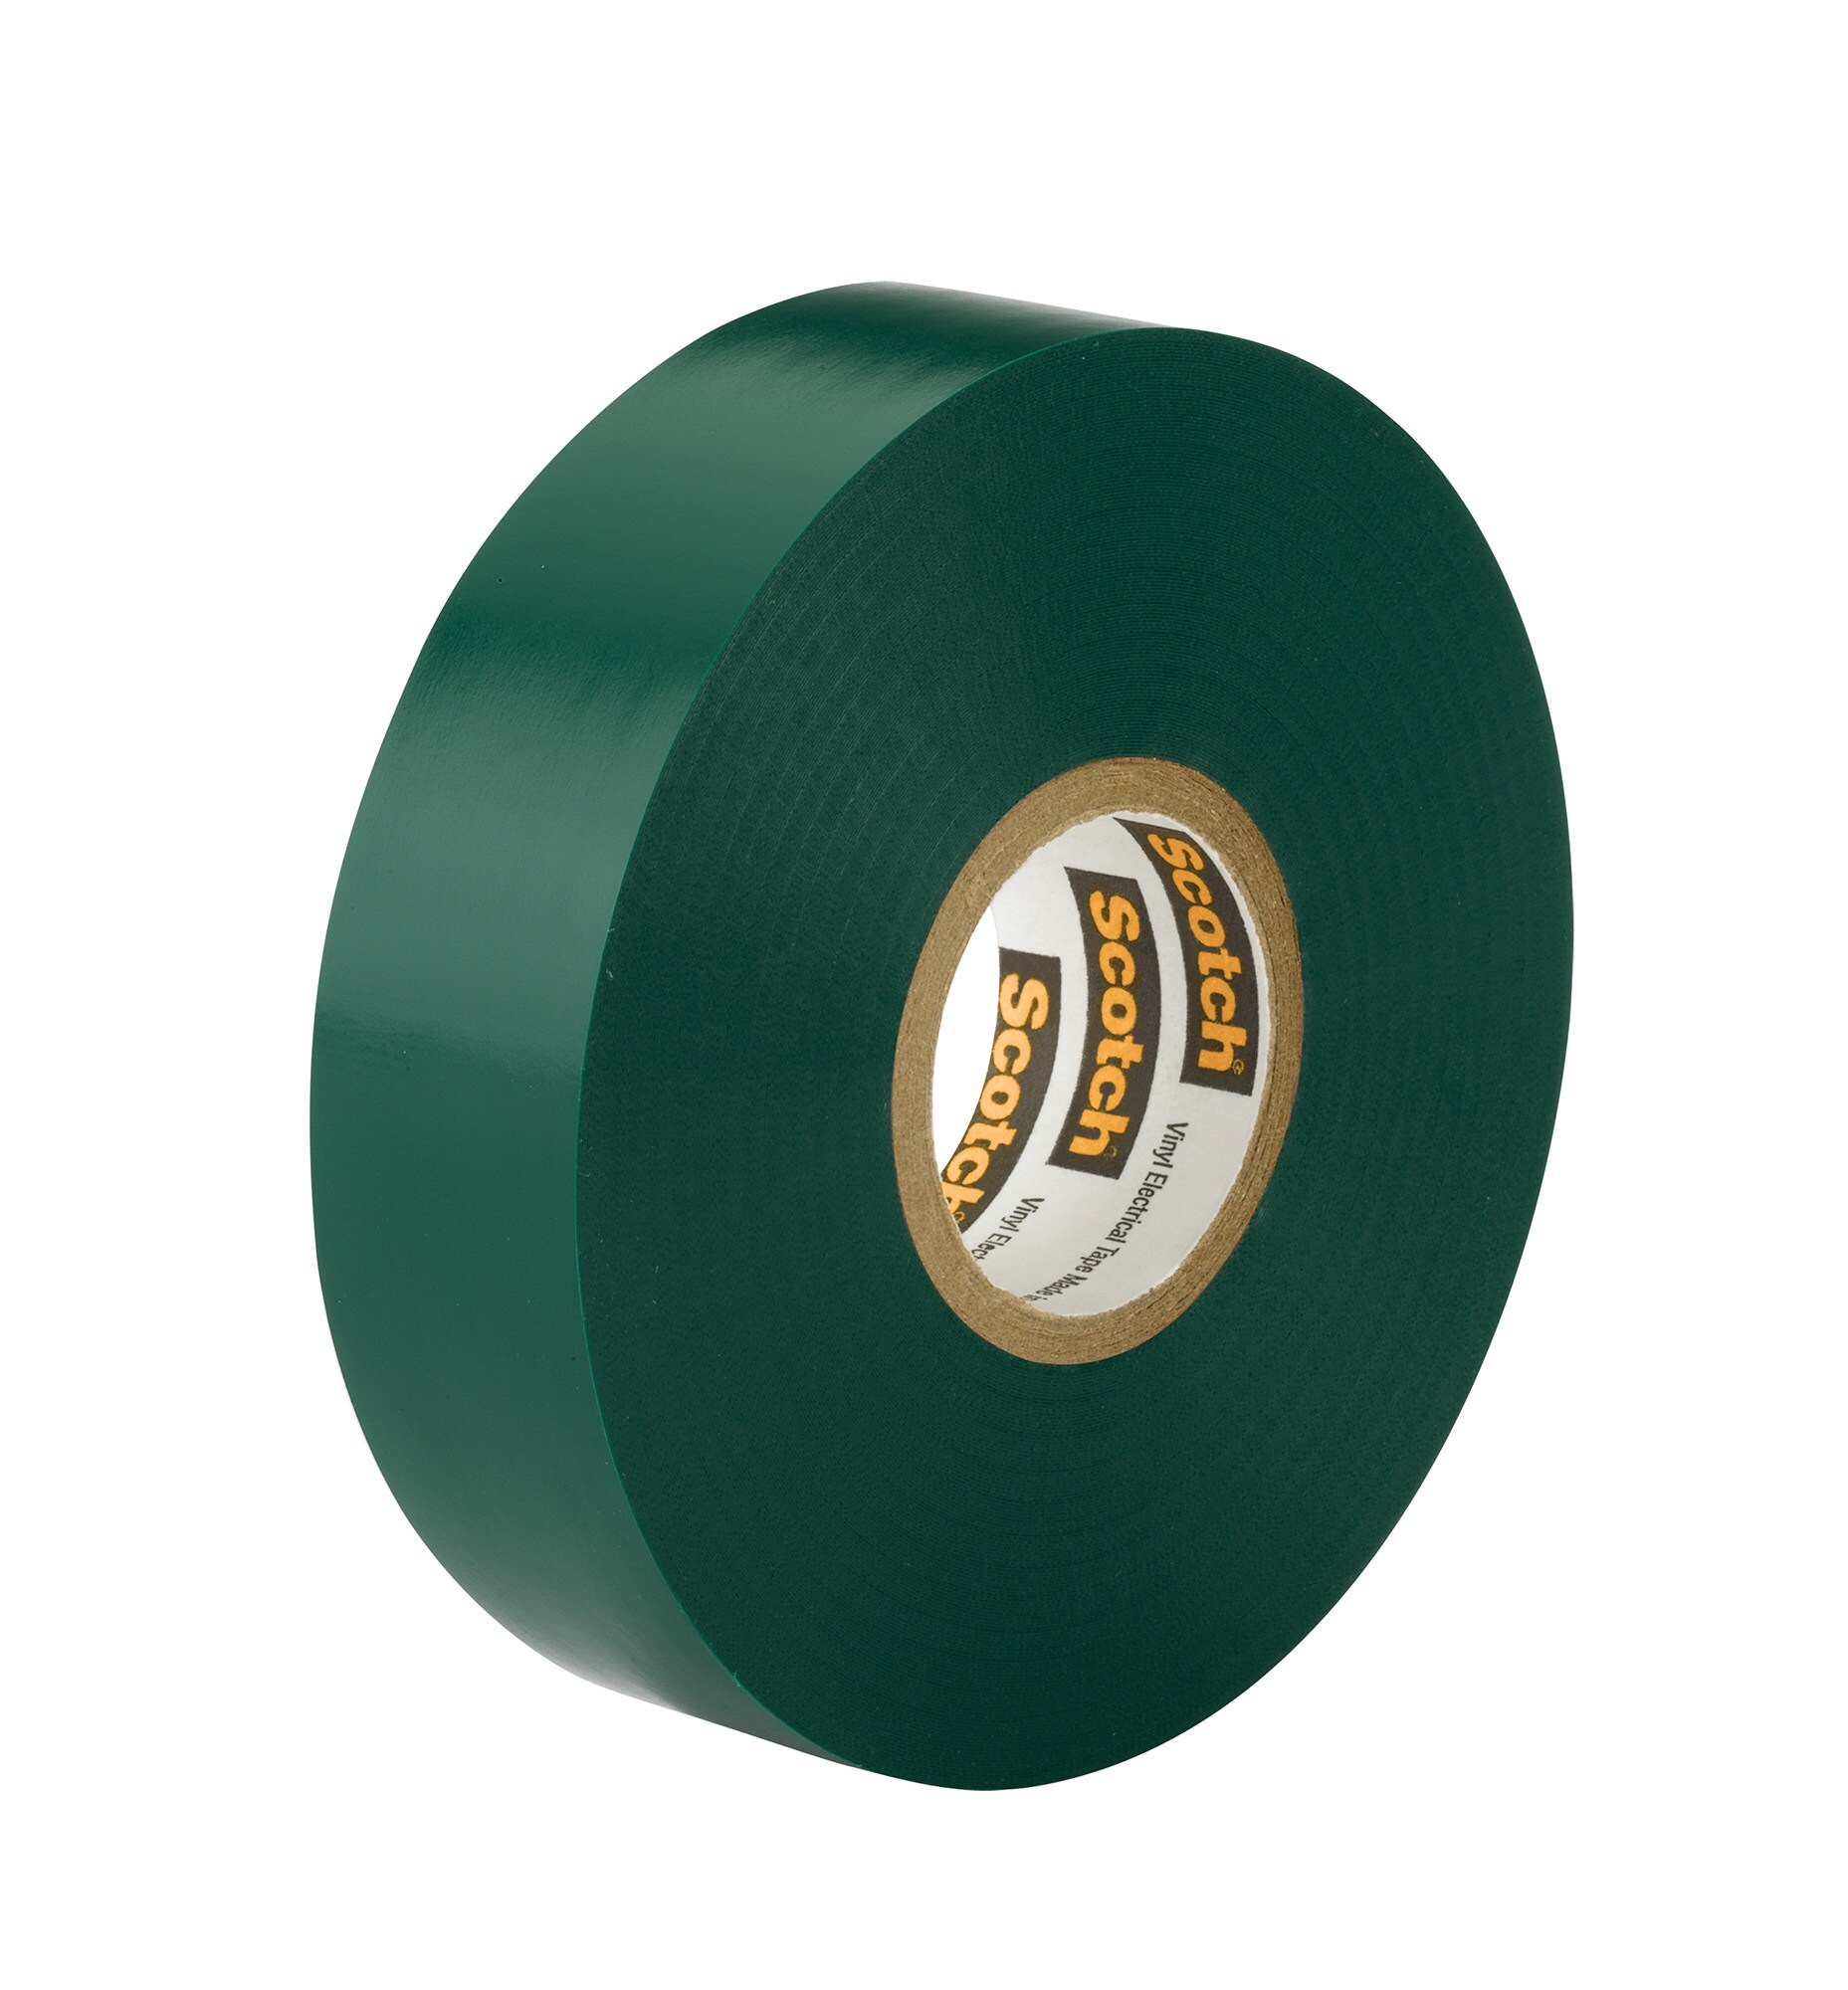 UL-Listed, BYBON Vinyl Electrical Tape,Green,3/4 in x 60 ft 1-Roll 